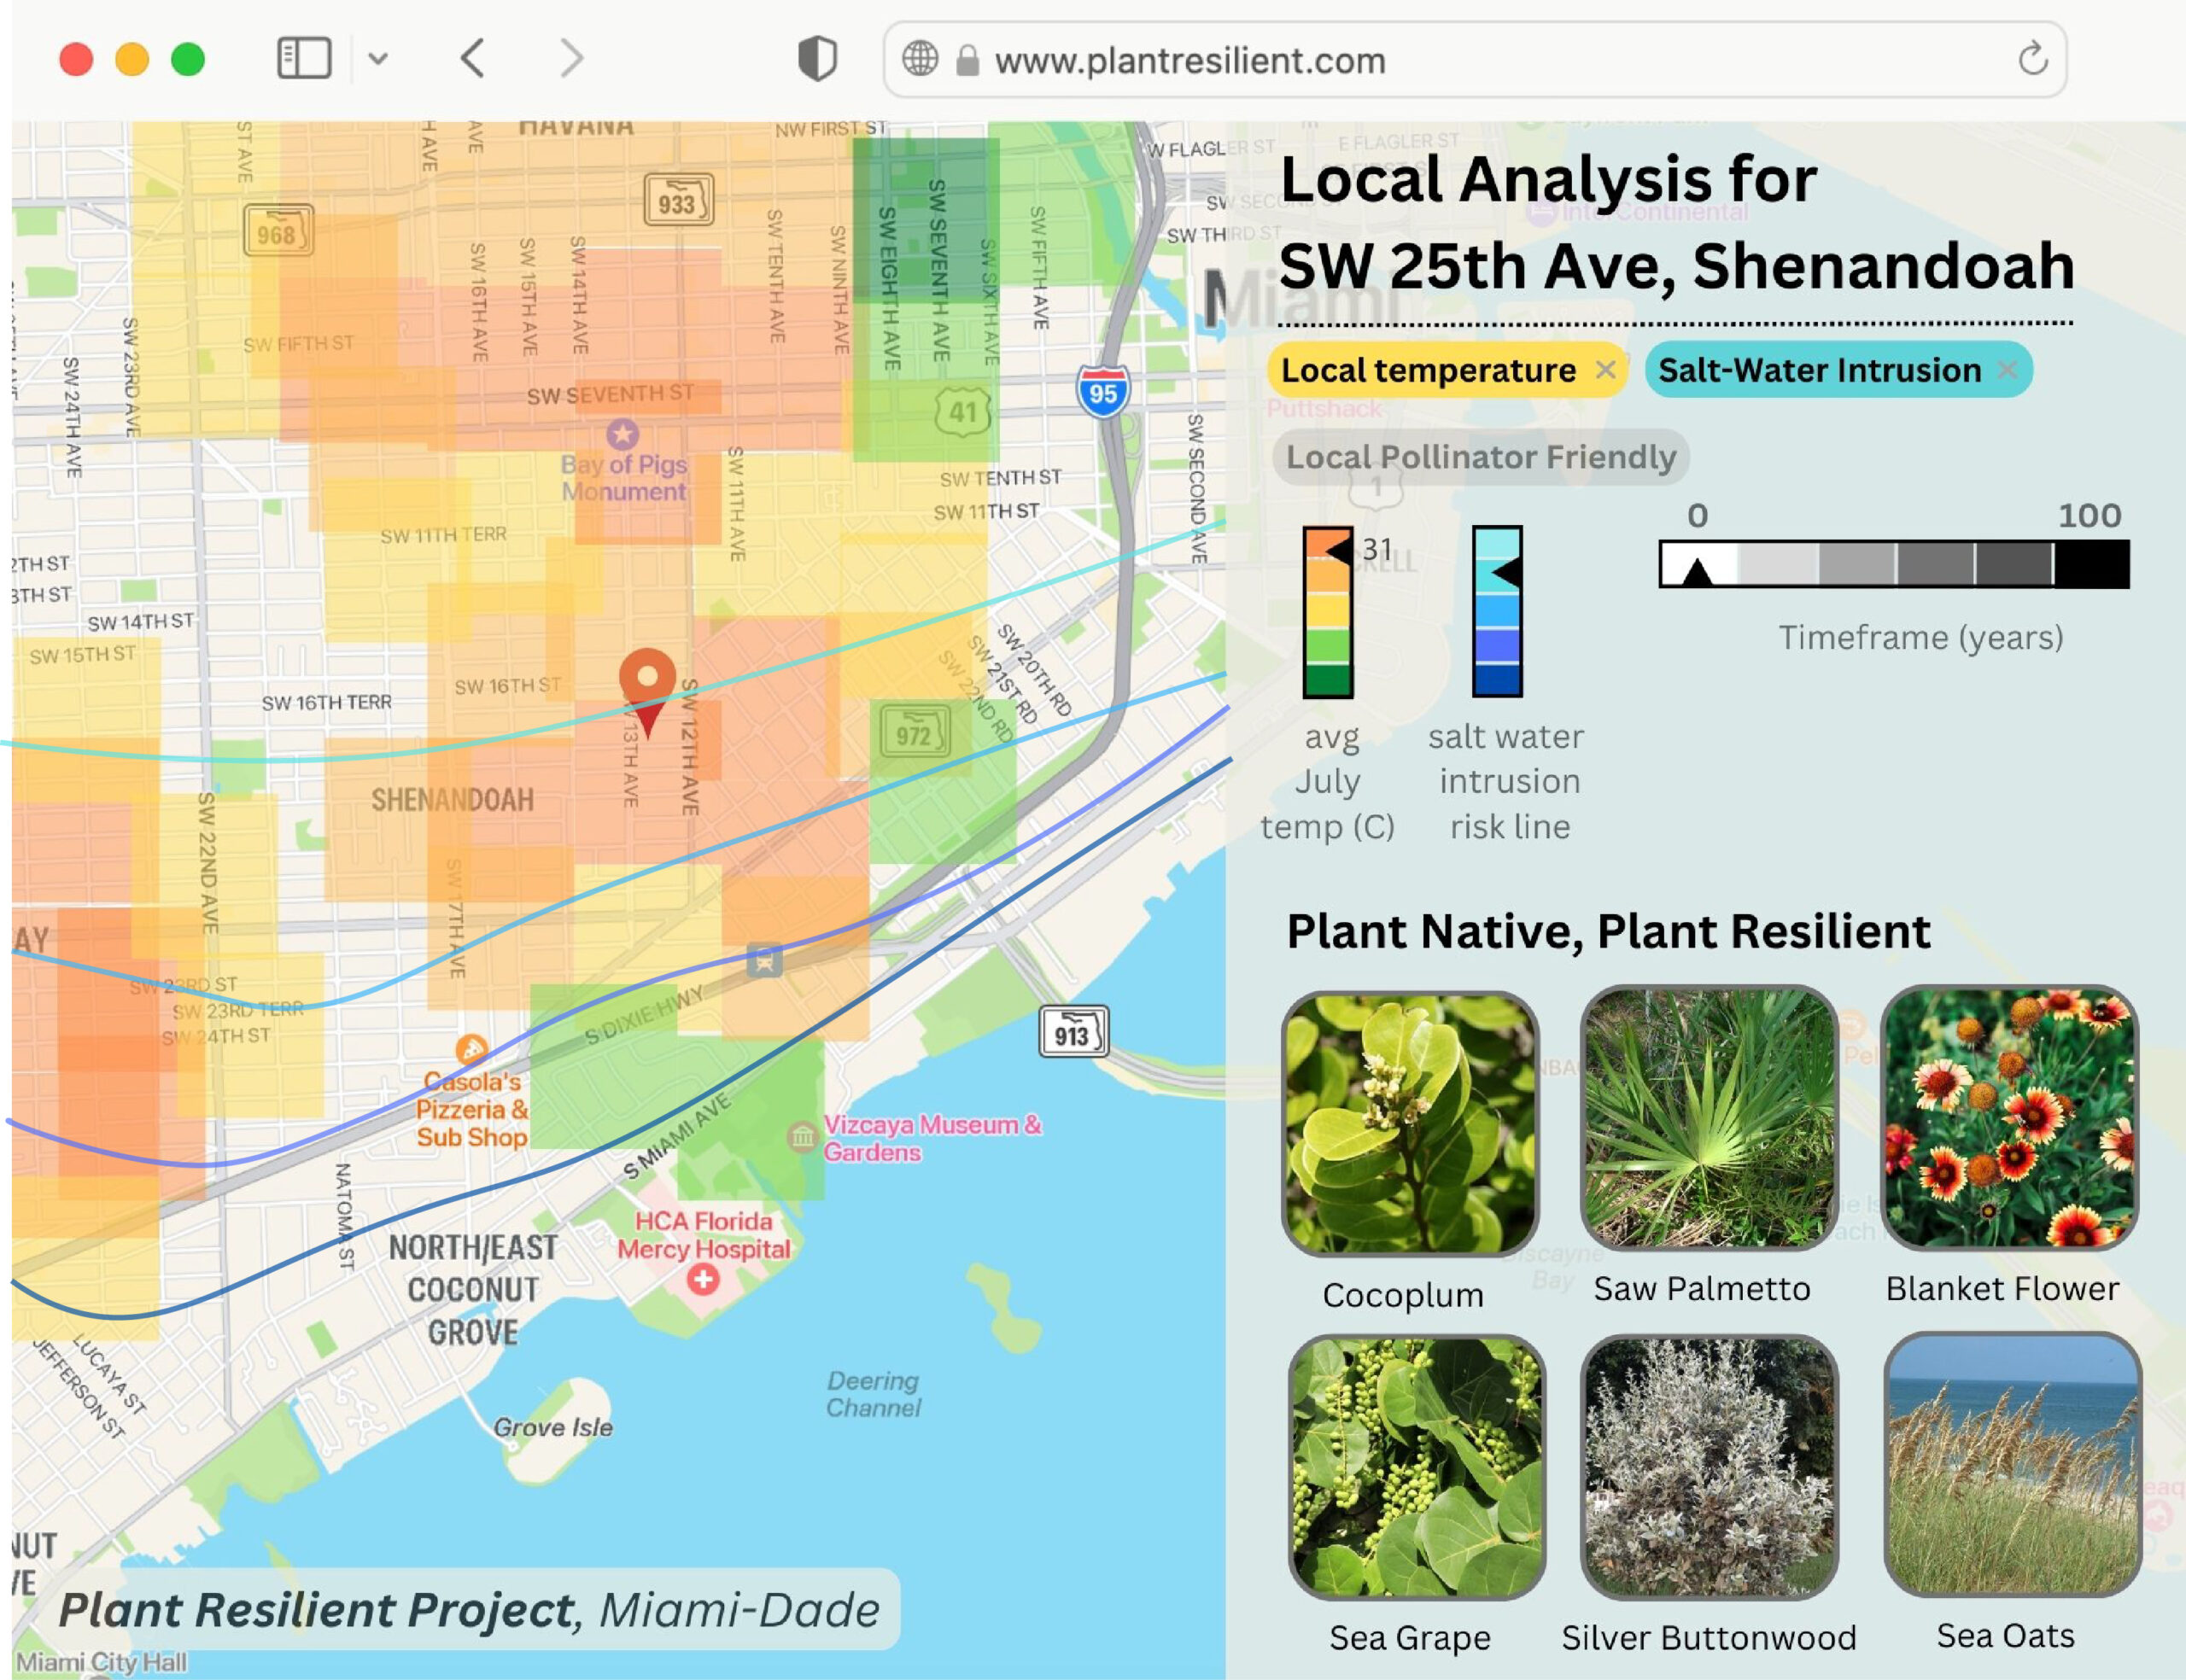 I am visualizing the effects of climate change on plant life in South Florida. I designed the Plant Resilient Project’s website. It uses satellite data tracking heat islands and saltwater intrusion. Users can map where non-heat tolerant or saltwater tolerant plants will die off. This information can inform gardeners and architects on what they should plant where. My data is from heat island maps created by graduate student Oaklin Keefe using data from Landsat 8 imagery, thermal imagery analysis, and Normalized Difference Vegetation Index (NDVI) imagery analysis. I also used saltwater intrusion mapping from the NOAA South Florida sea level rise map. My website looks at a location to find plant species that will resist local environmental shifts caused by climate change. Other information, like how much saltwater intrusion can affect an area, is shown through simple graphics. Gardeners, architects, and city planners can use this website to create green spaces that improve communities in the short- and long-term. It also connects users with nearby native plant nurseries and informs them on plant care, and will help protect local biodiversity.